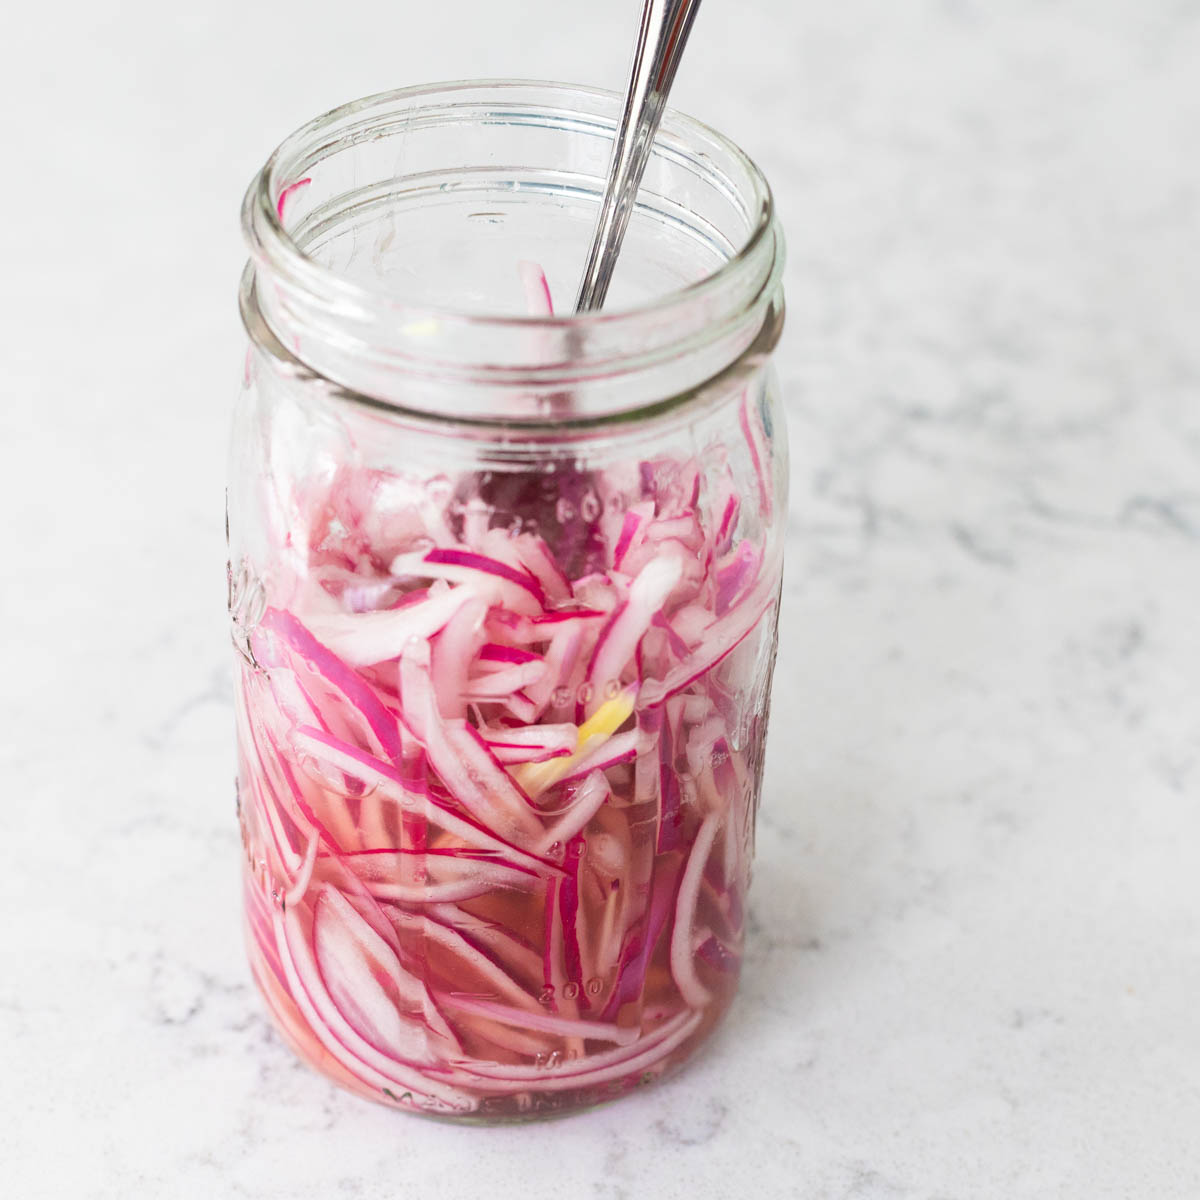 The red onions are now a bright pink inside the mason jar